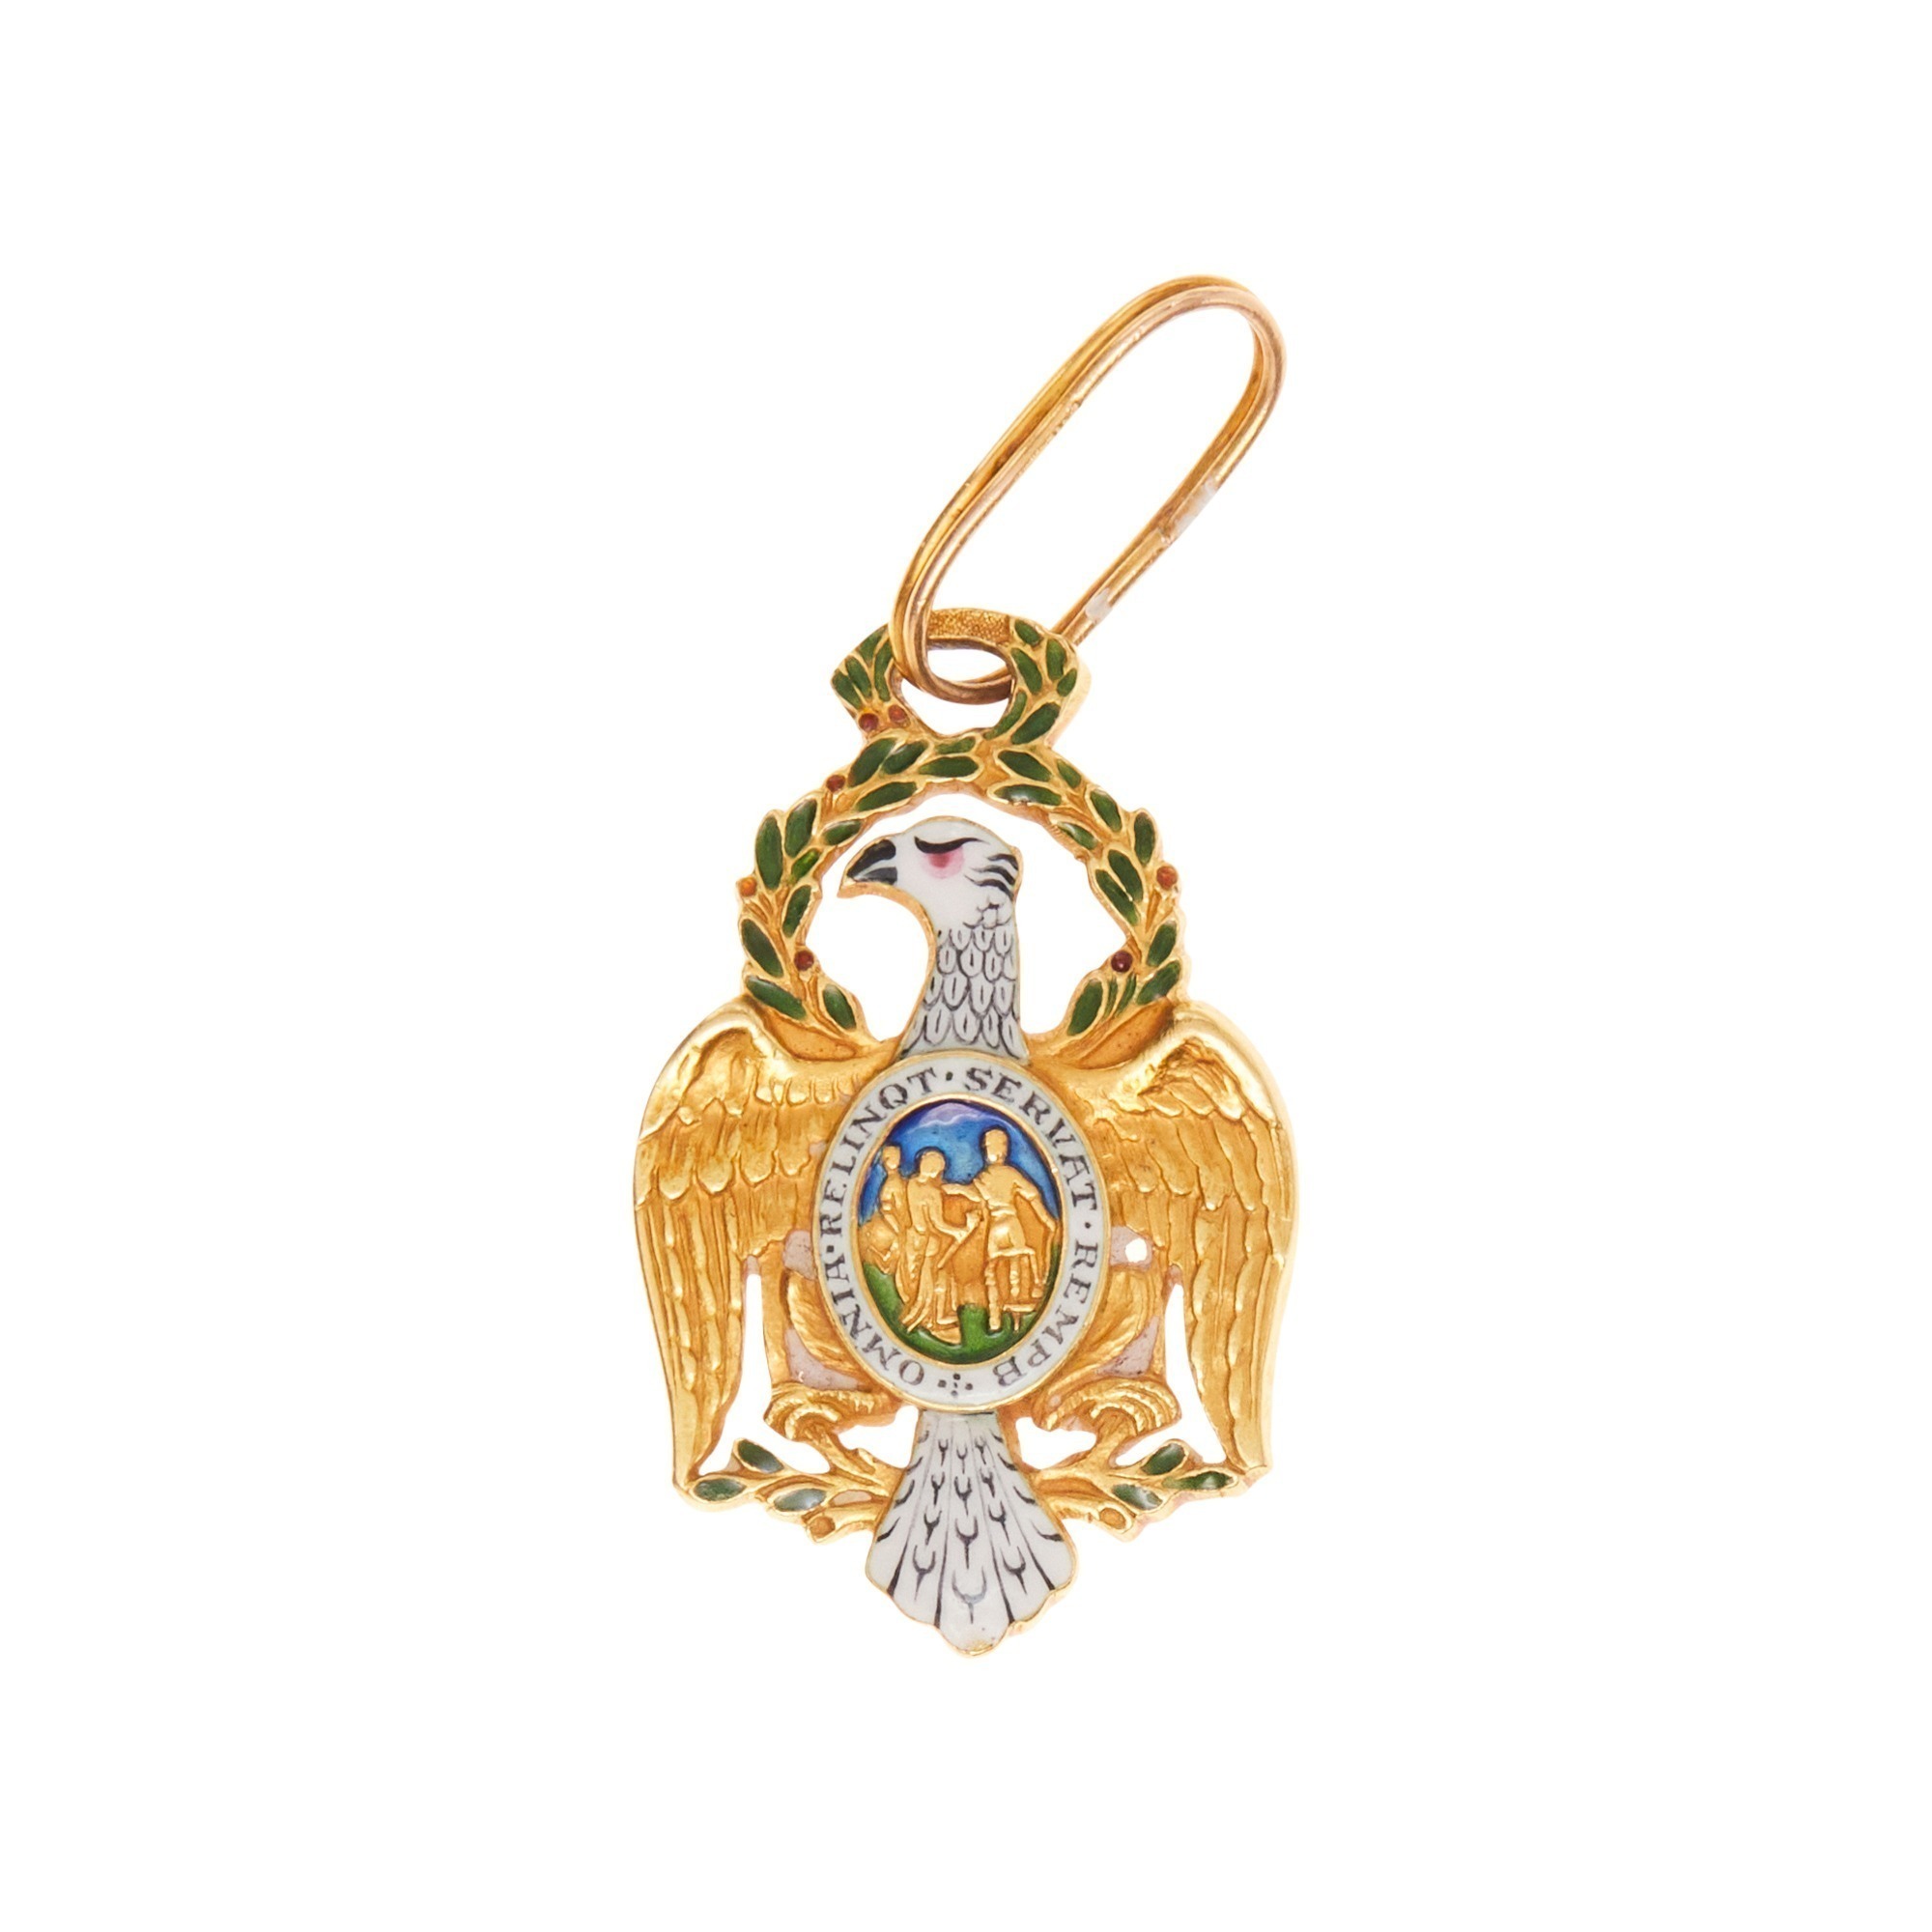 Unusual 18K Yellow Gold and Enamel Crest Style Pendant